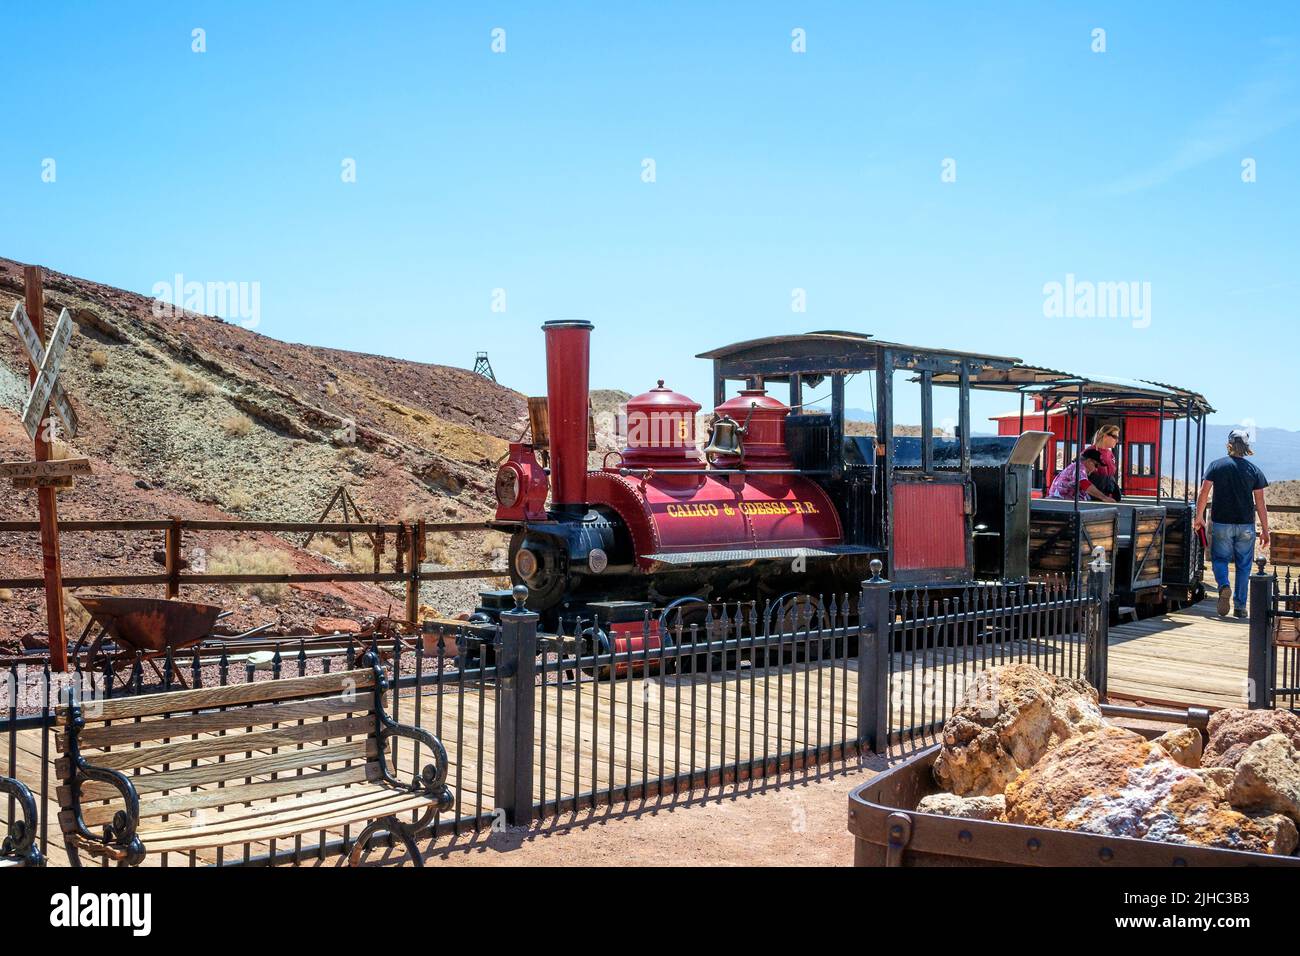 Vintage locomotive with carriage in old silver miner town Calico, USA. Stock Photo